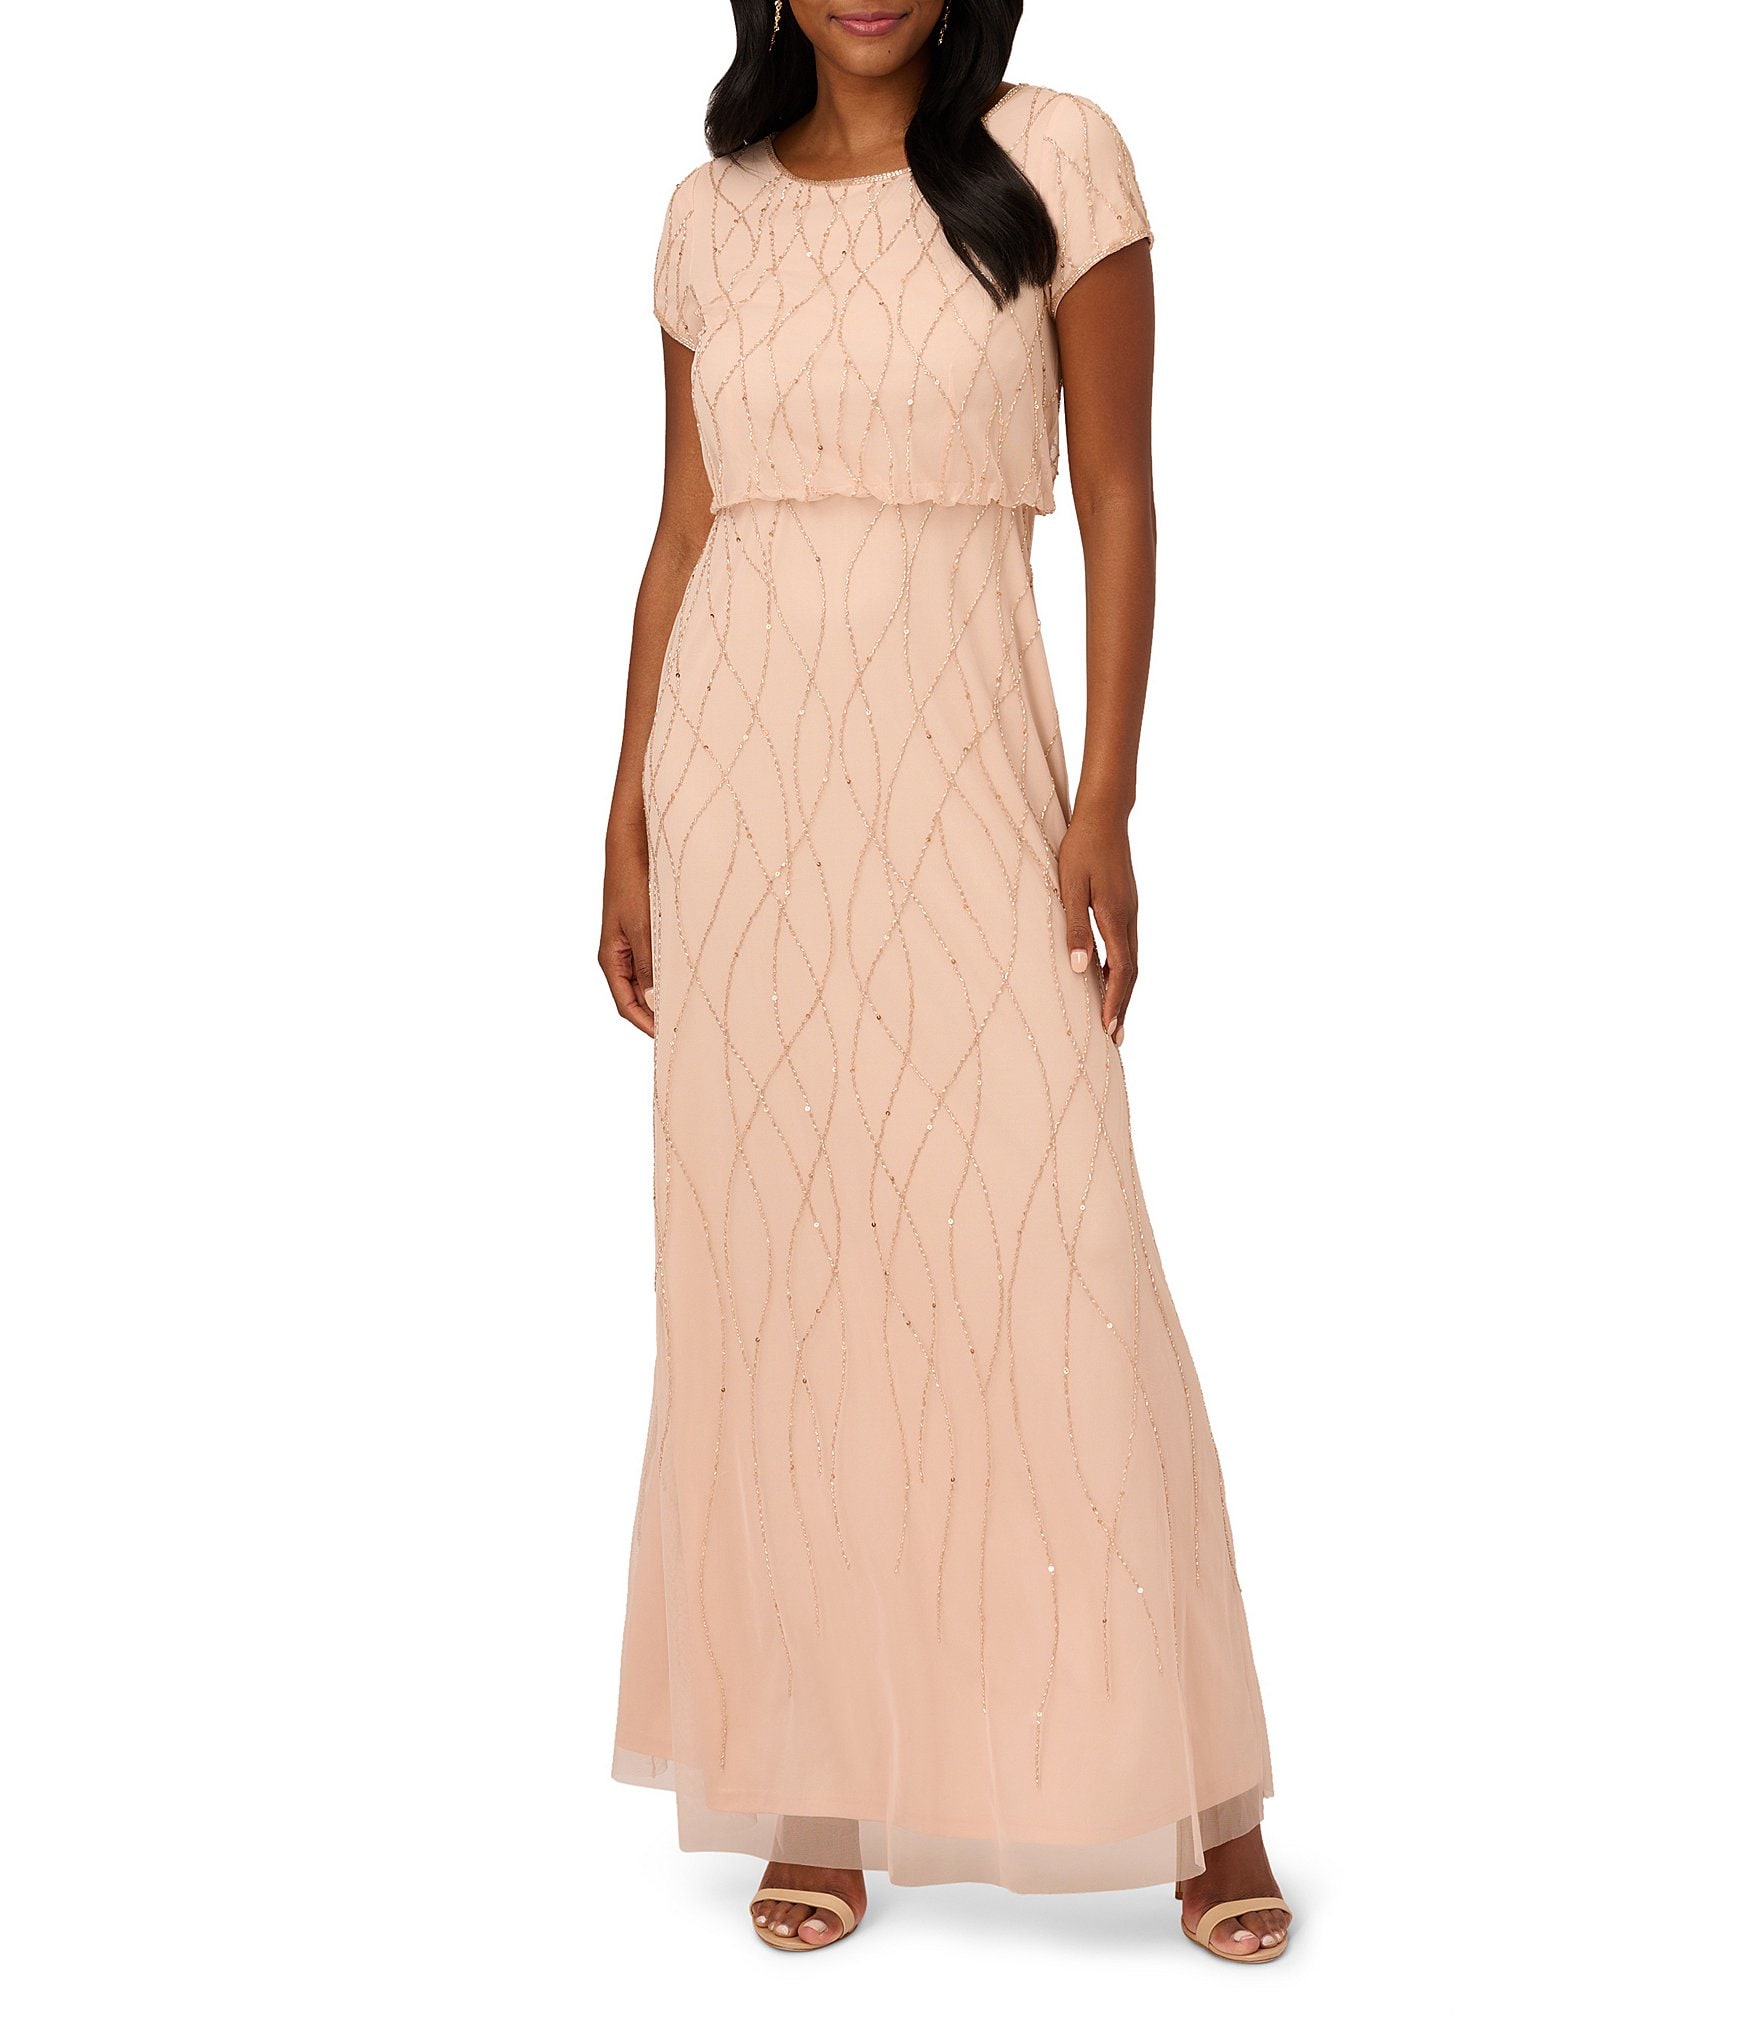 Adrianna Papell Round Neck Short Sleeve Beaded Blouson Gown